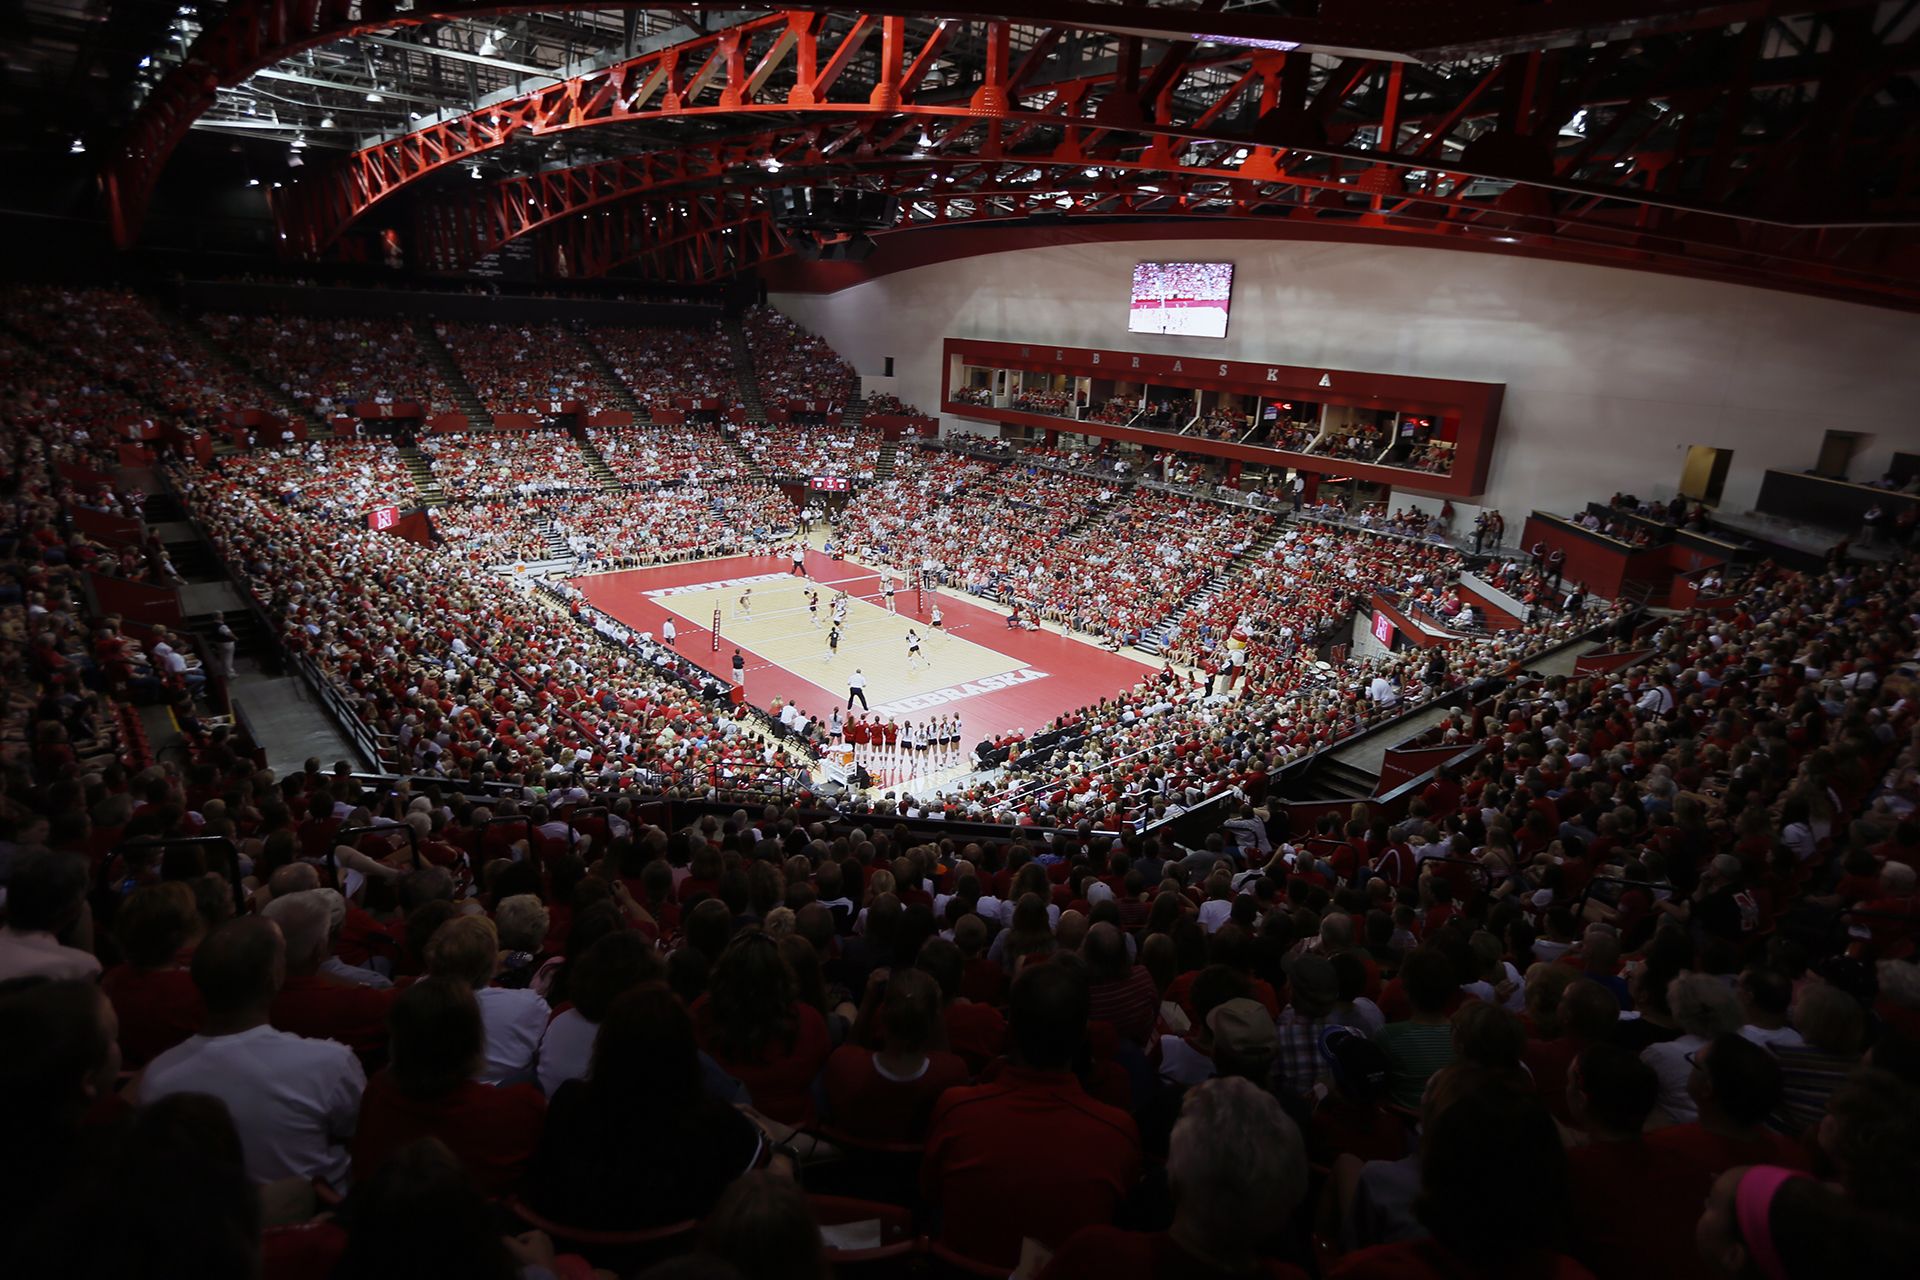 Fans enjoying a volleyball game held at the Bob Devaney Sports Center